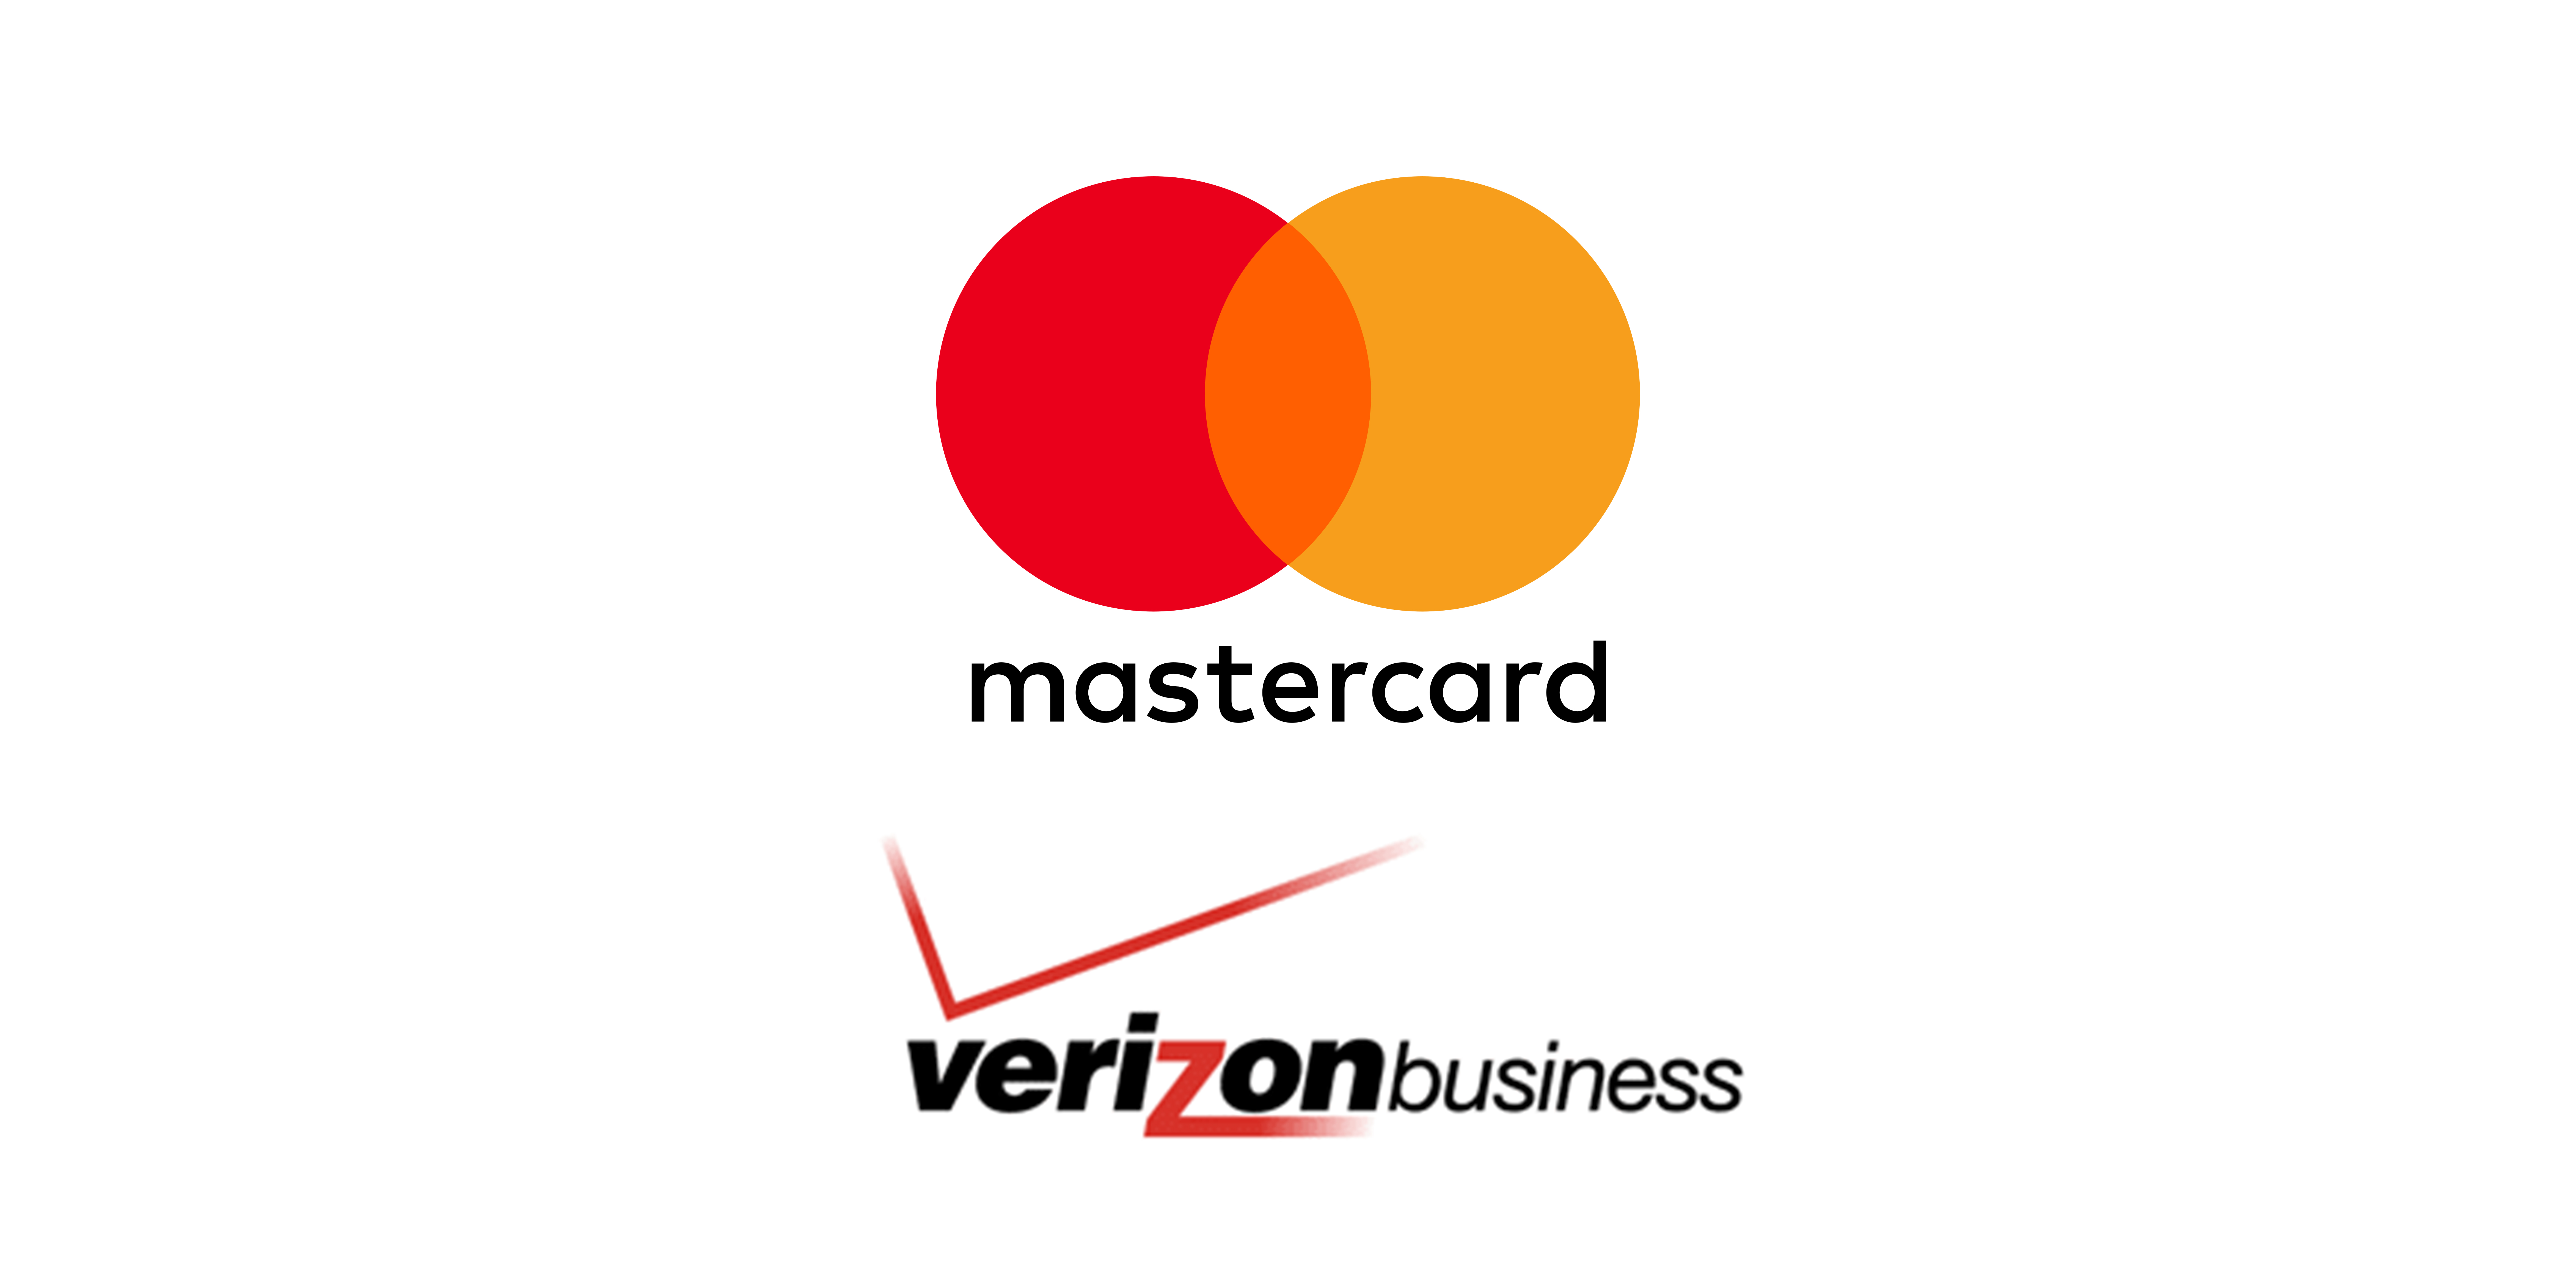 Verizon Business and Mastercard Partner to Bring 5G to the Global Payments Industry